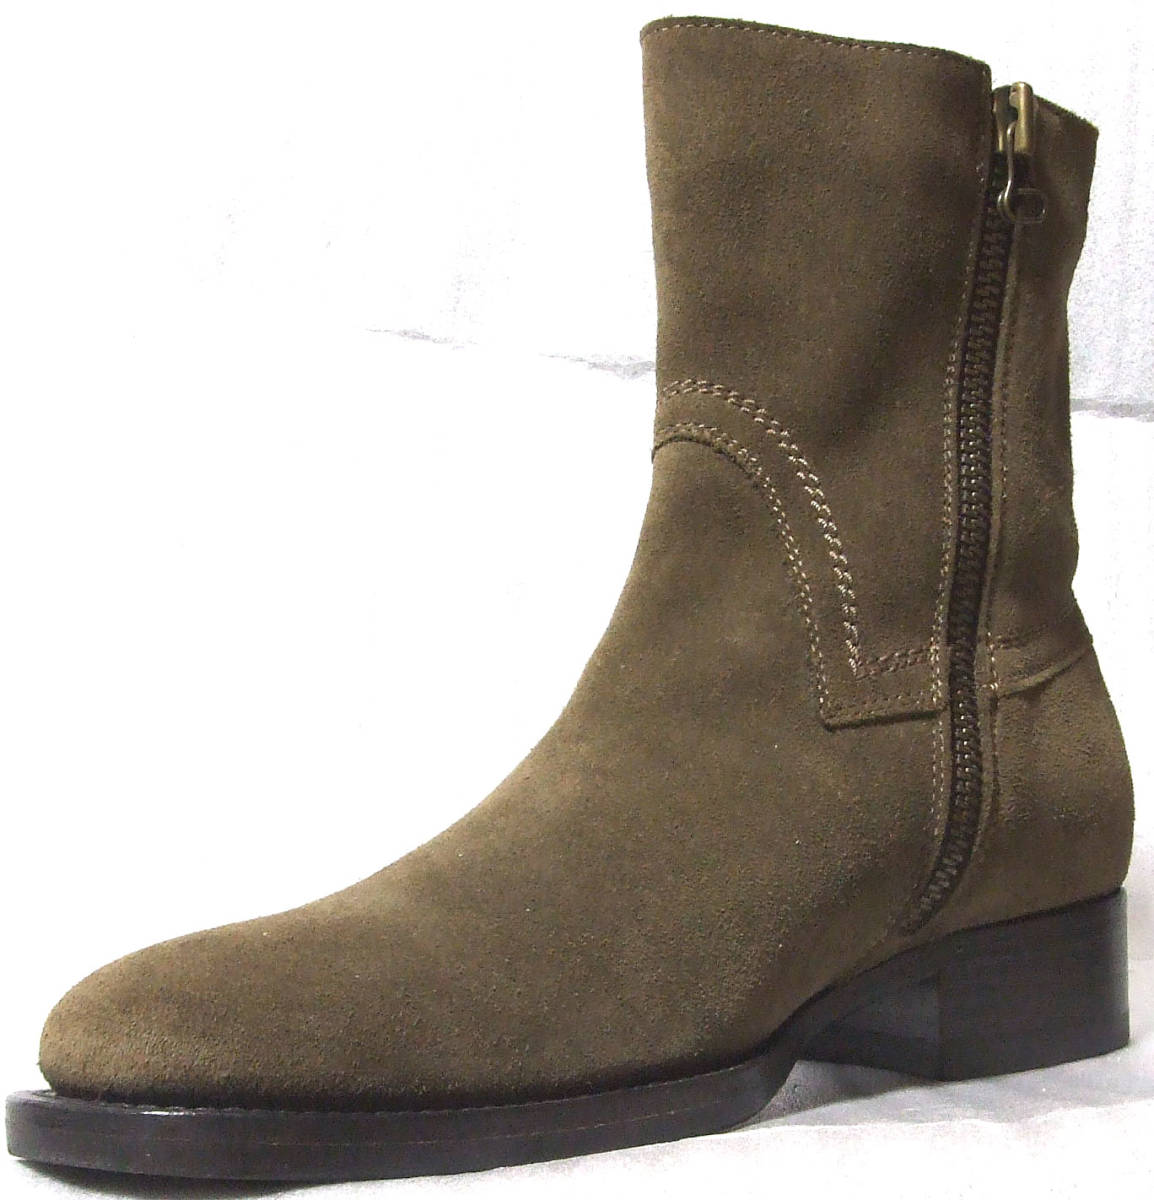 ■BUTTERO-B1120 SIDE ZIP SUEDE BOOT【40：SAND】箱付試着のみ保管新品ブッテロ_画像6